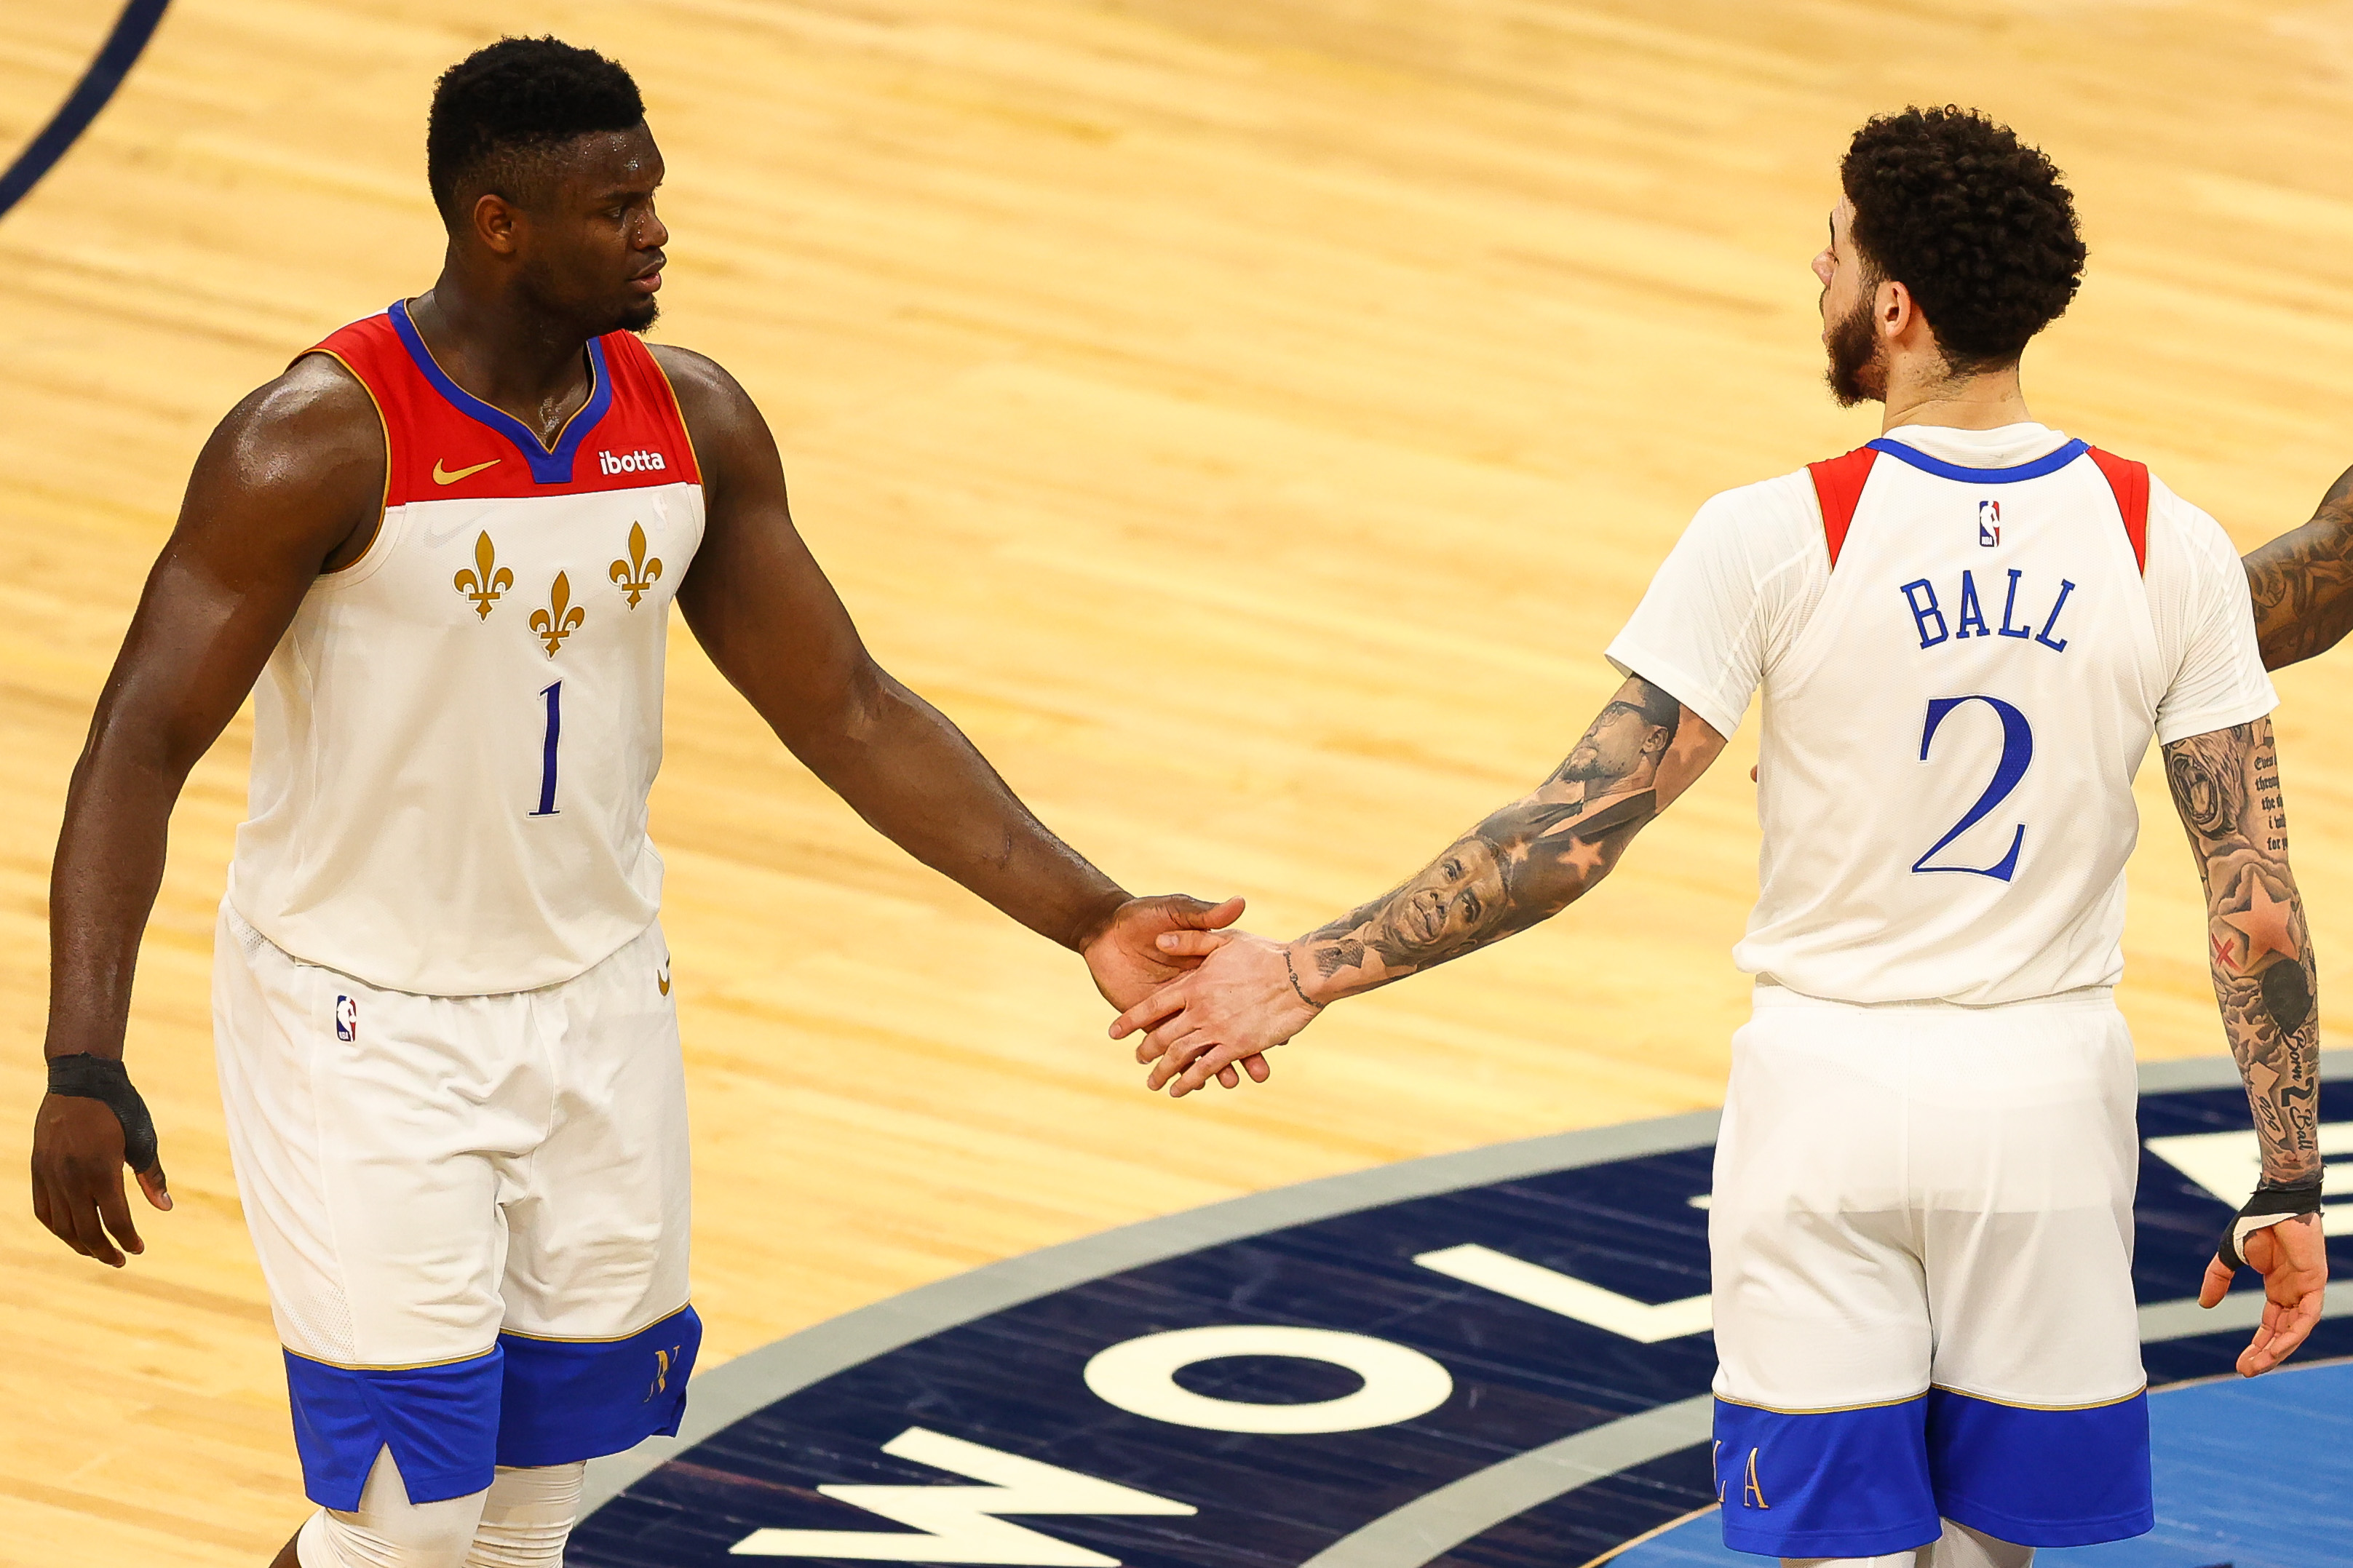 Zion Williamson and Lonzo Ball of the New Orleans Pelicans celebrate after a play during over time against the Minnesota Timberwolves at Target Center on May 1, 2021.